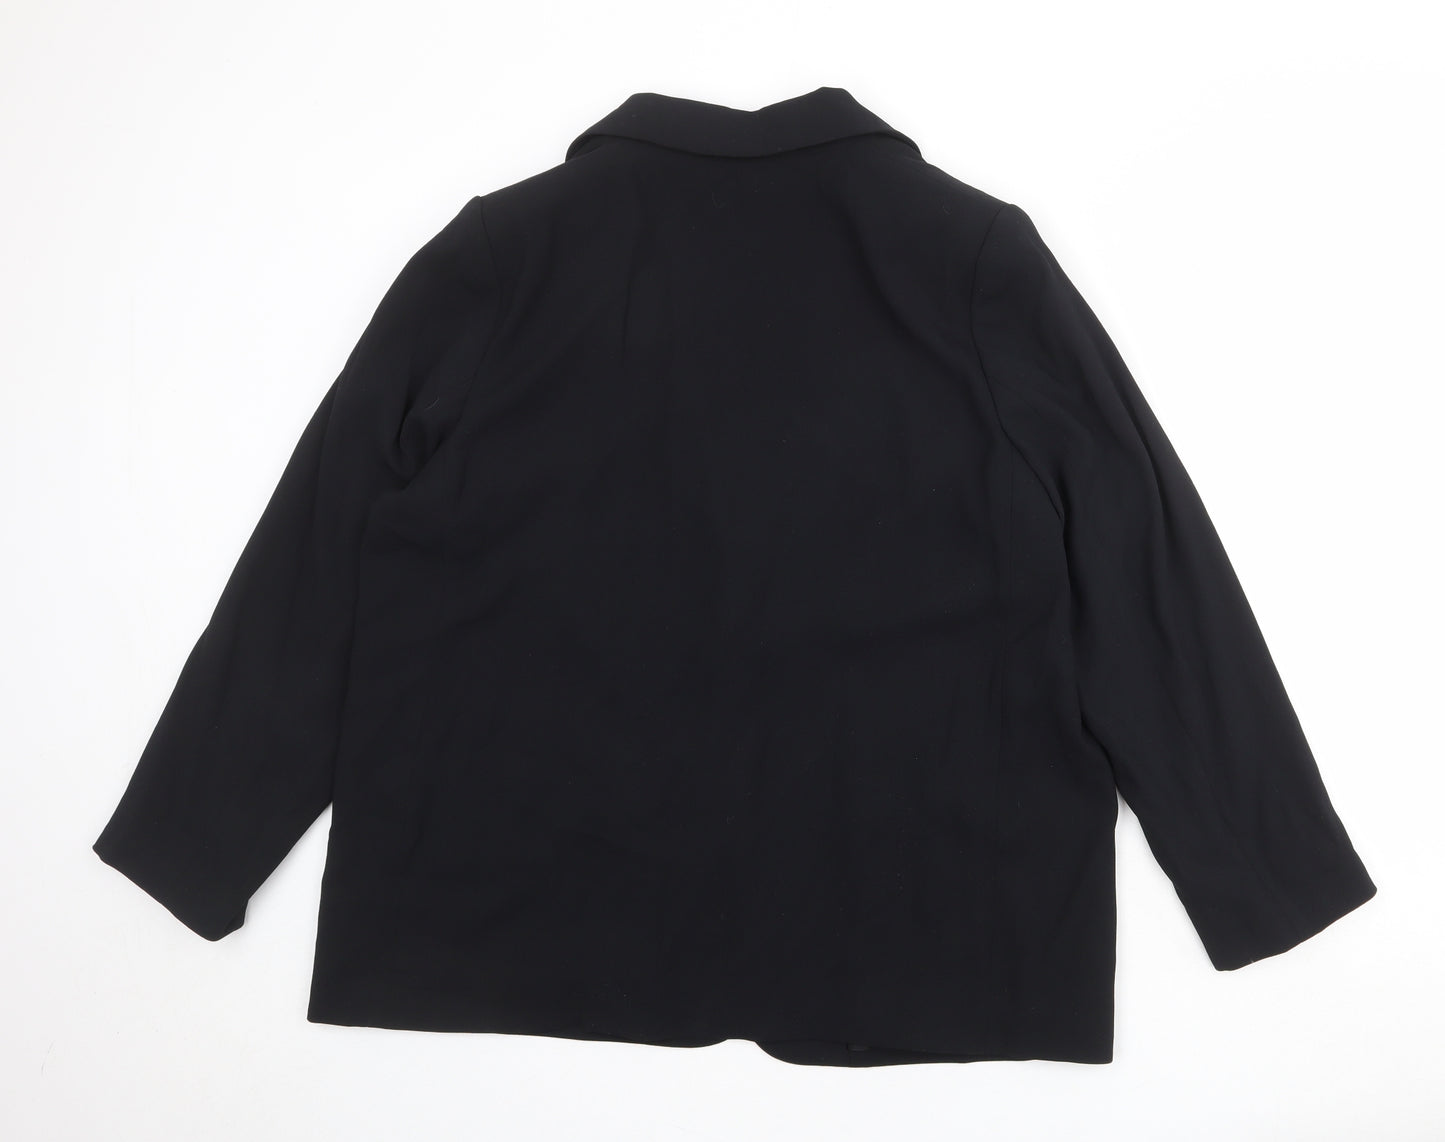 Marks and Spencer Womens Black Polyester Jacket Blazer Size 16 - Open Style